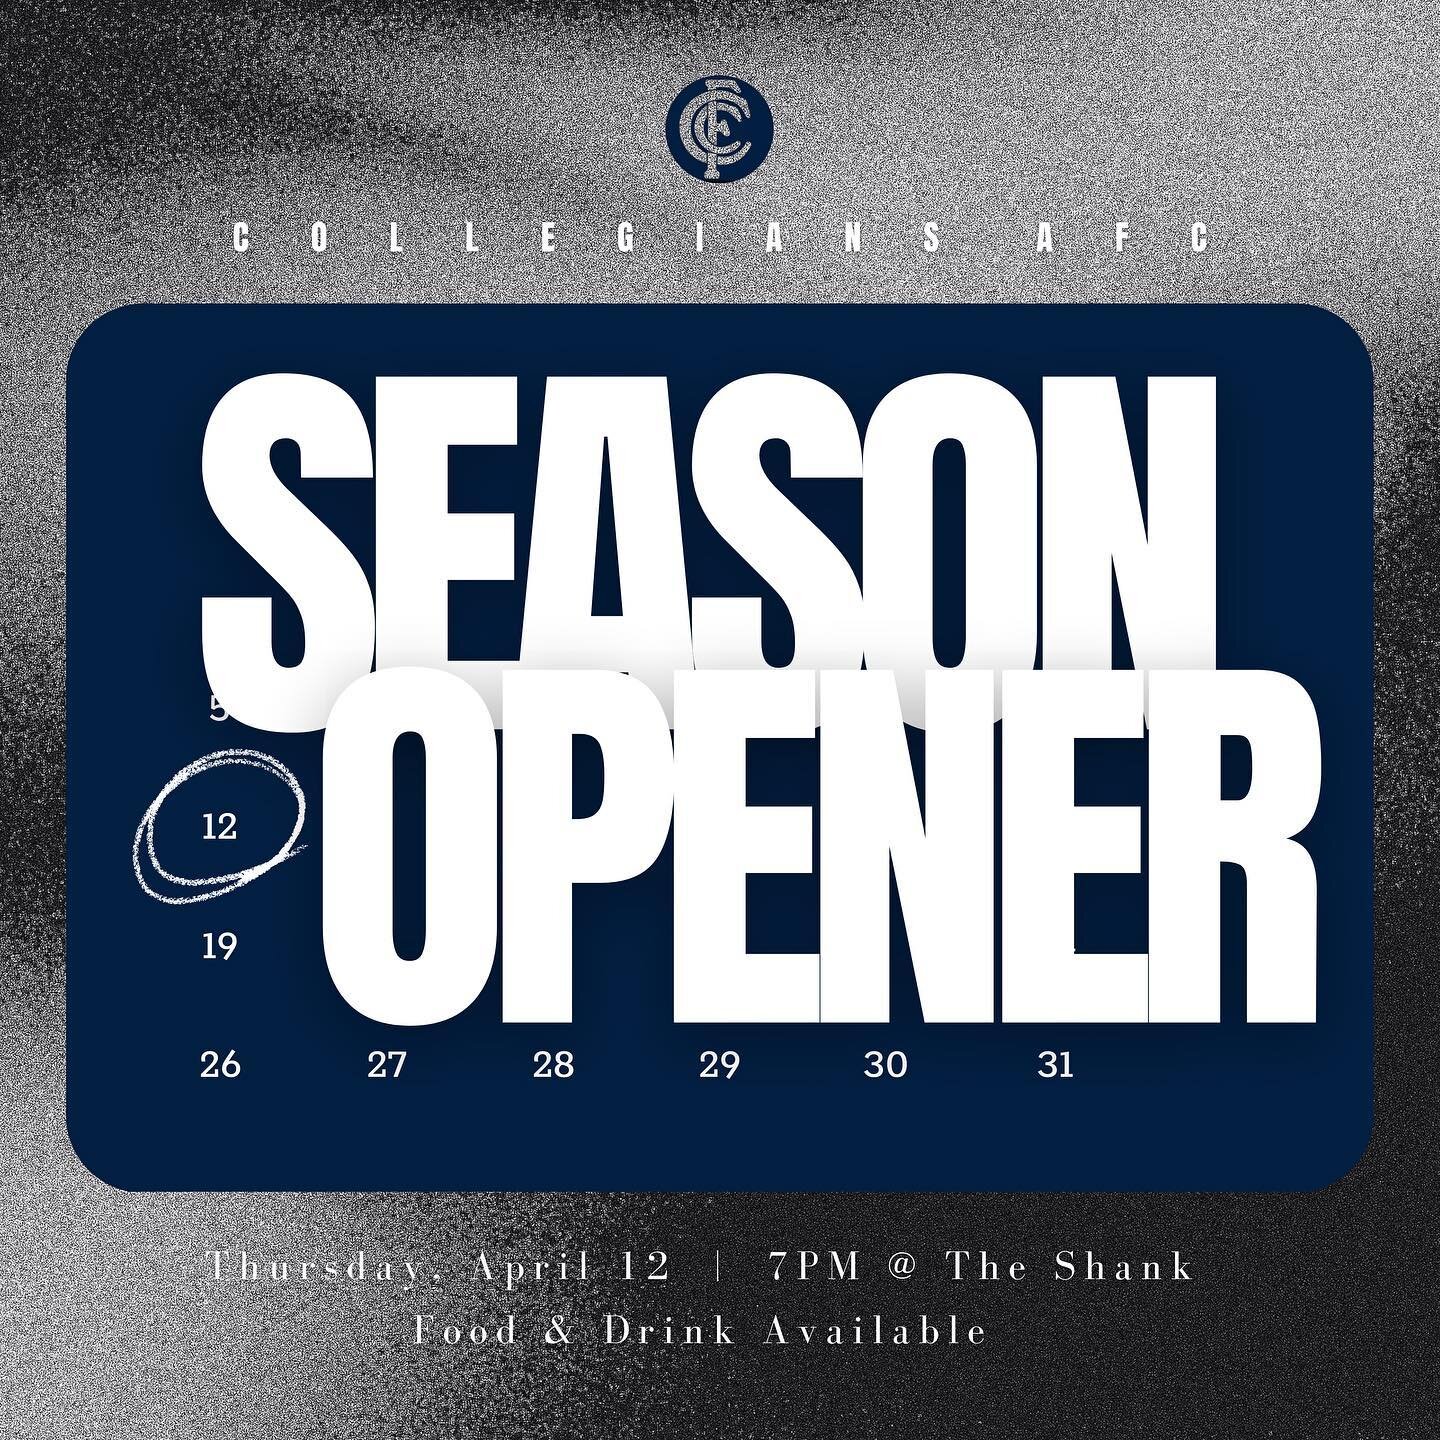 ❗️ TOMORROW NIGHT ❗️ 

On Thursday, April 13th, we will be kicking off the 2023 season with our season launch at the Shank. 

All players and supporters are invited to the club for the announcement of the leadership groups and the round 1 lineups of 